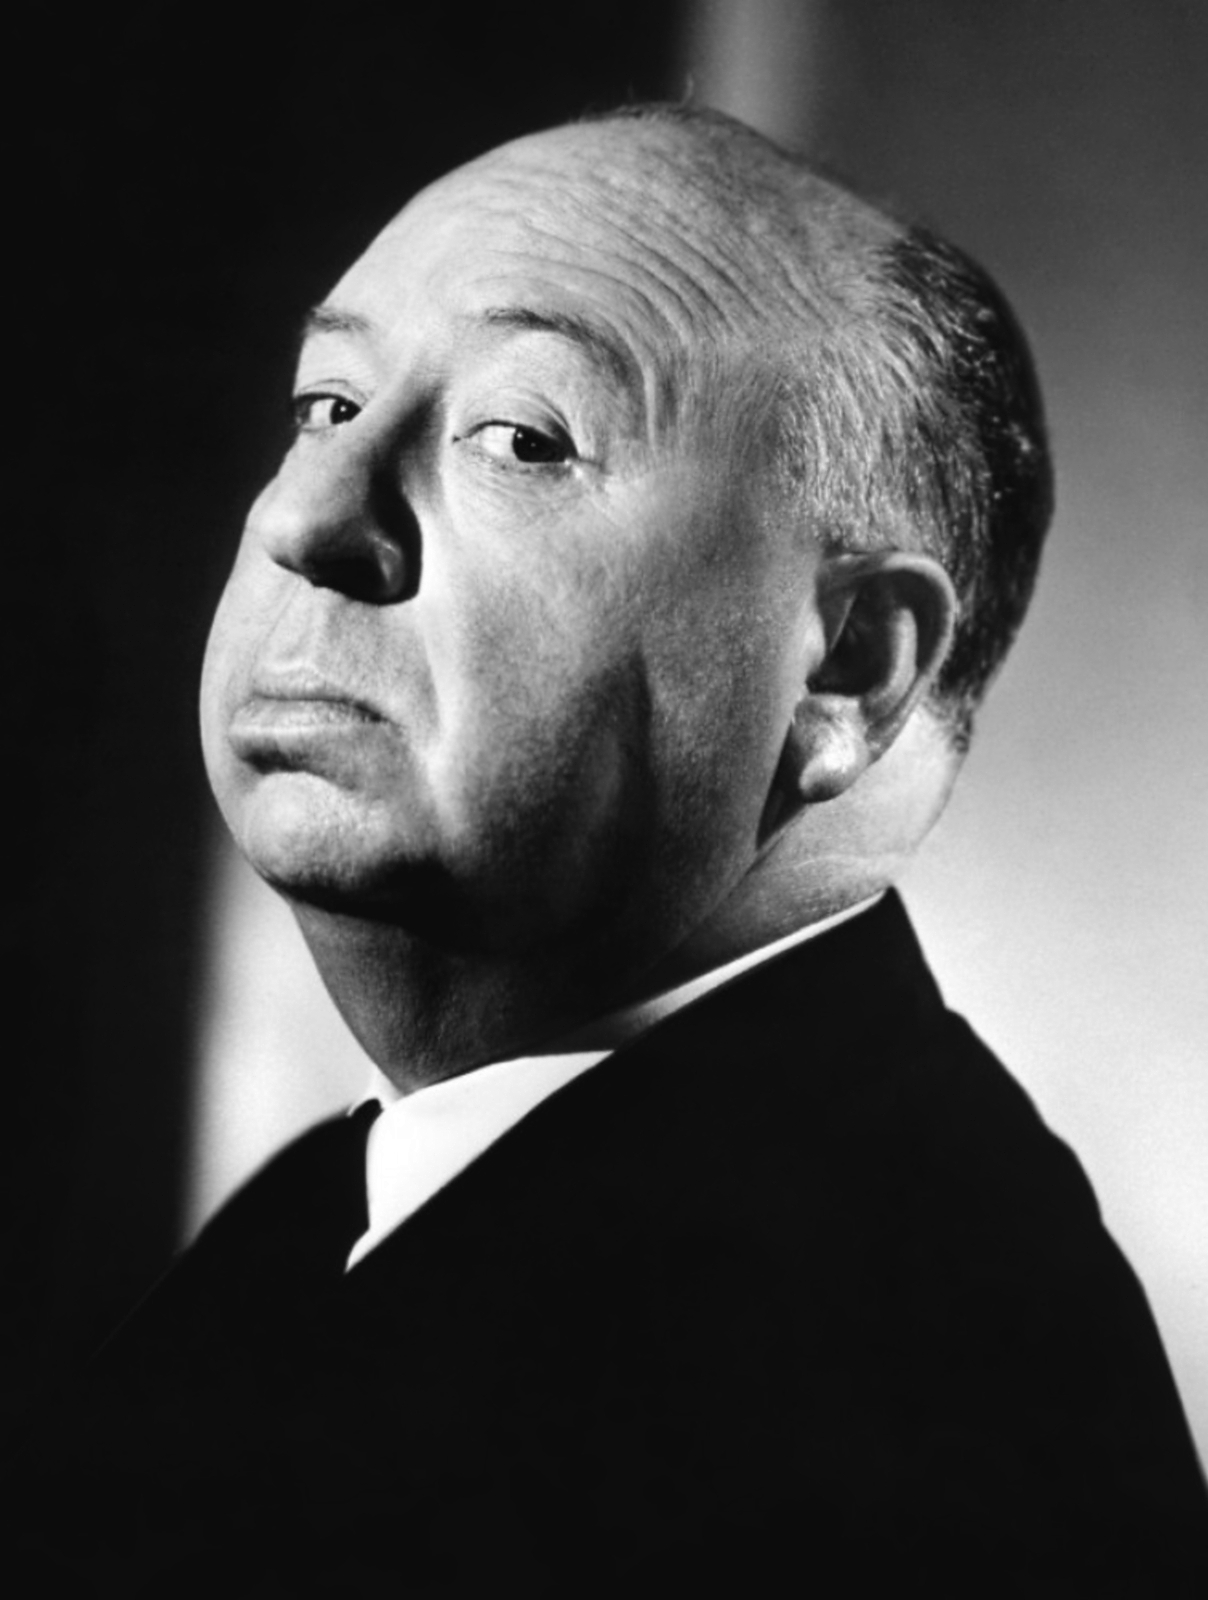 Alfred Hitchcock - "Can you turn the lights on, I'm scared to go down stairs. "